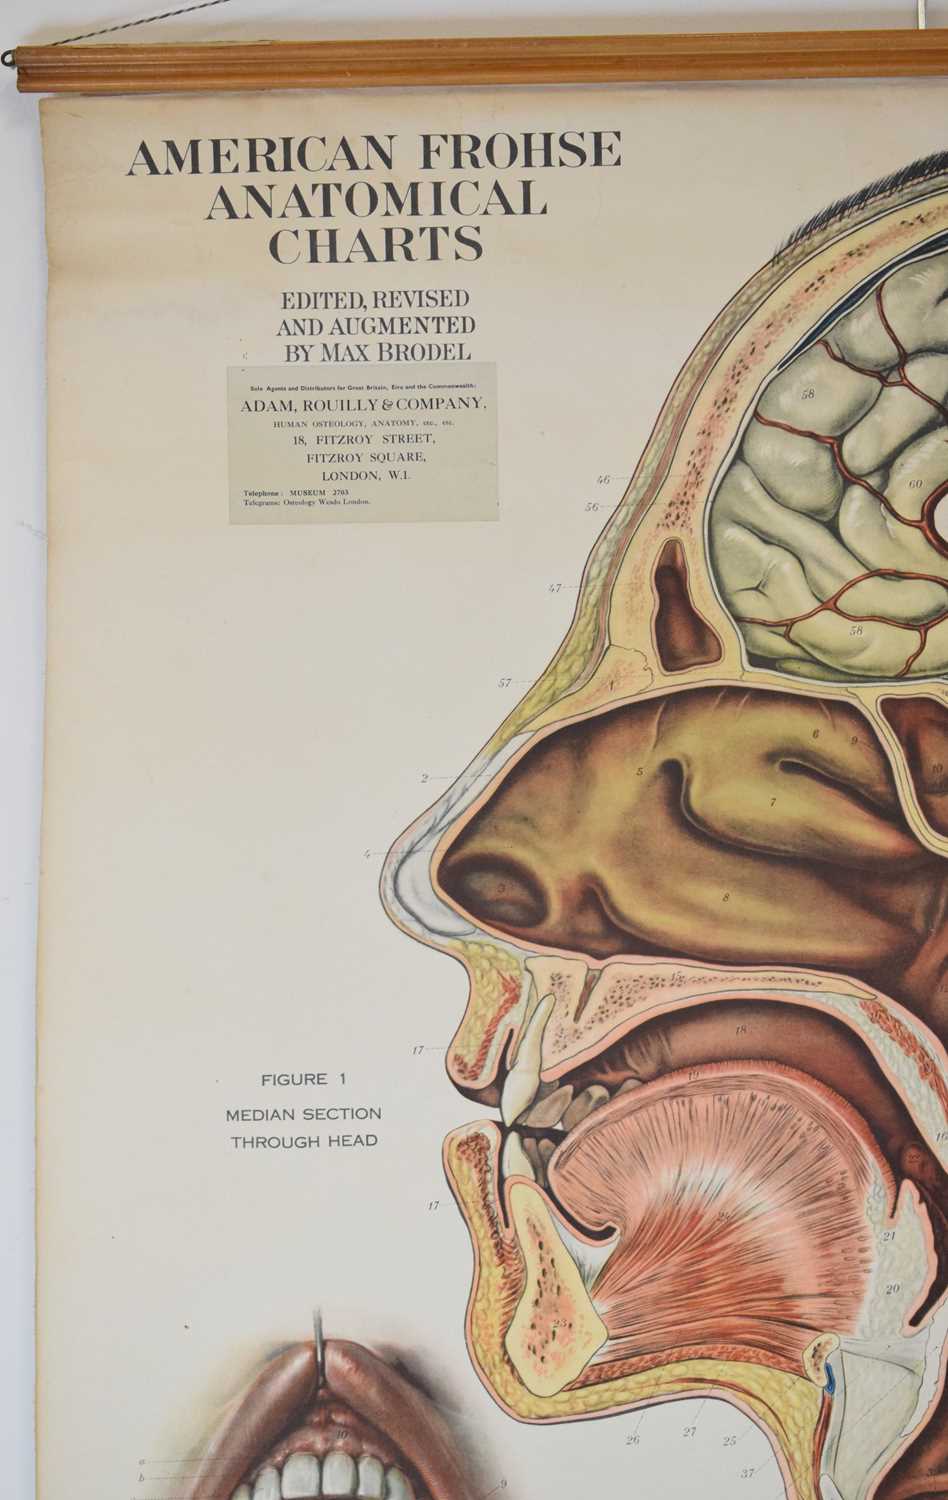 Adam Rouilly & Co Ltd - American Frohse Anatomical Chart - Image 3 of 8